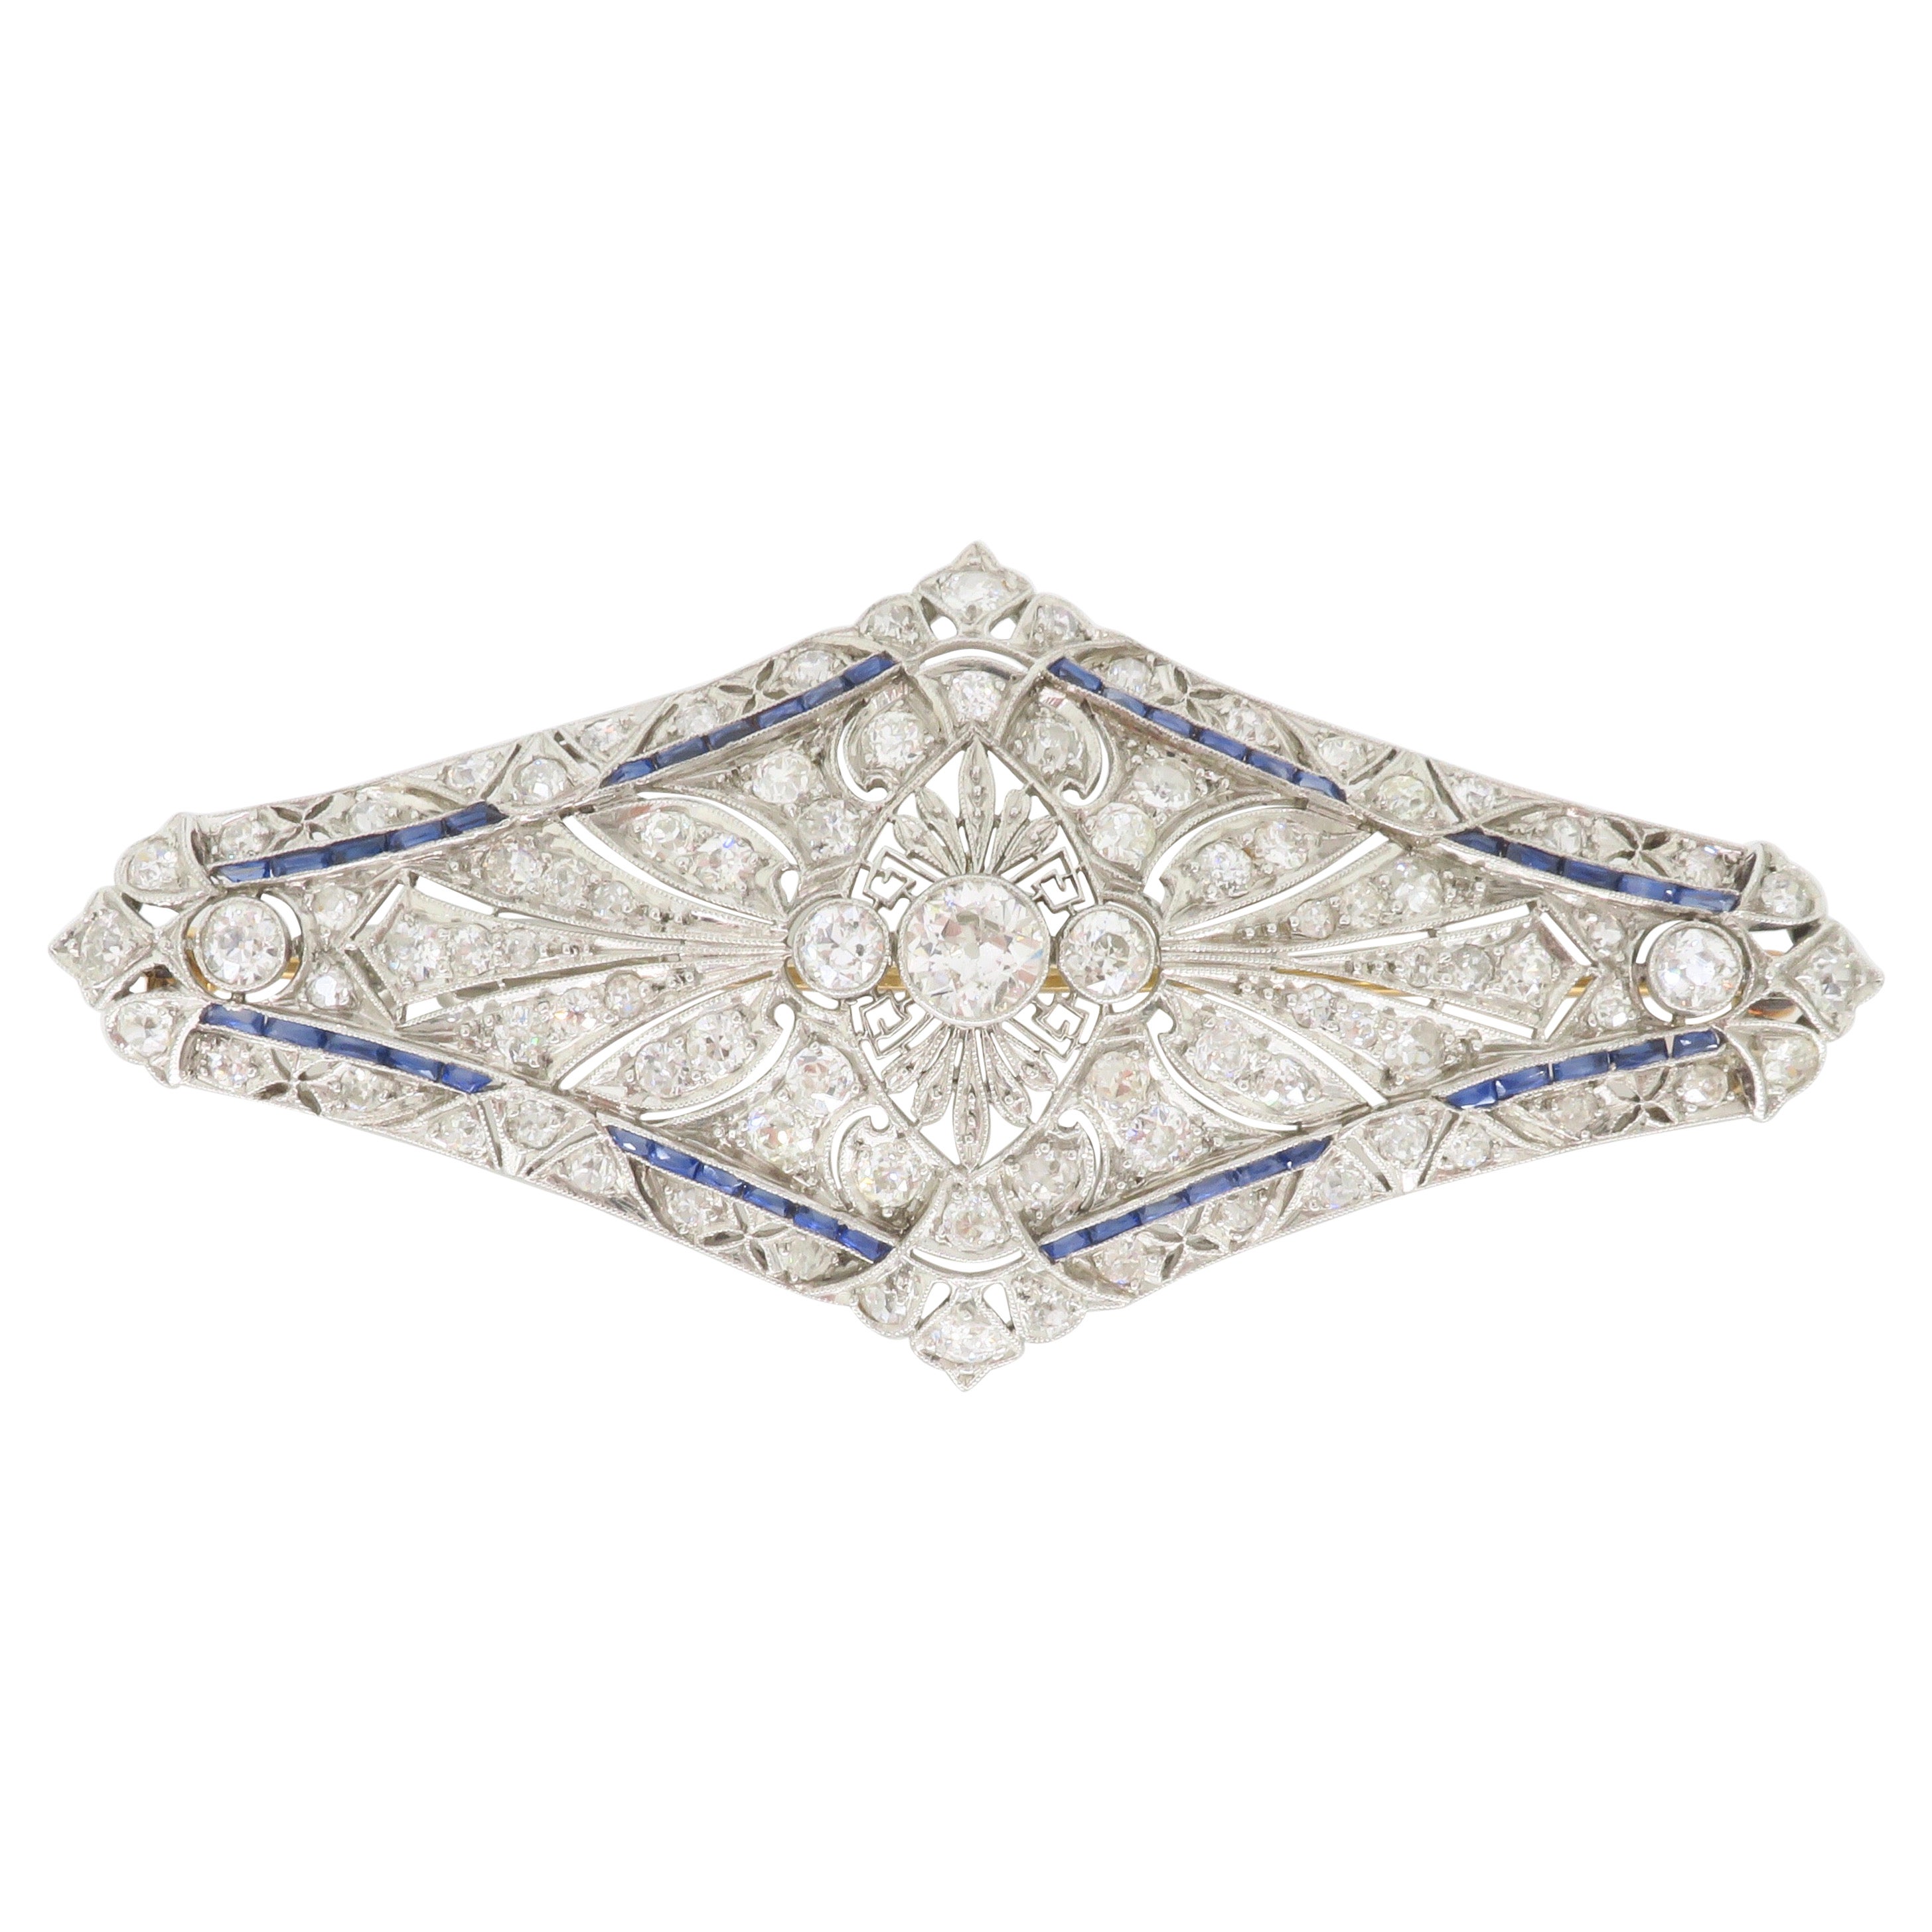 Vintage Brooch Made in Platinum with Diamonds & Blue Sapphires